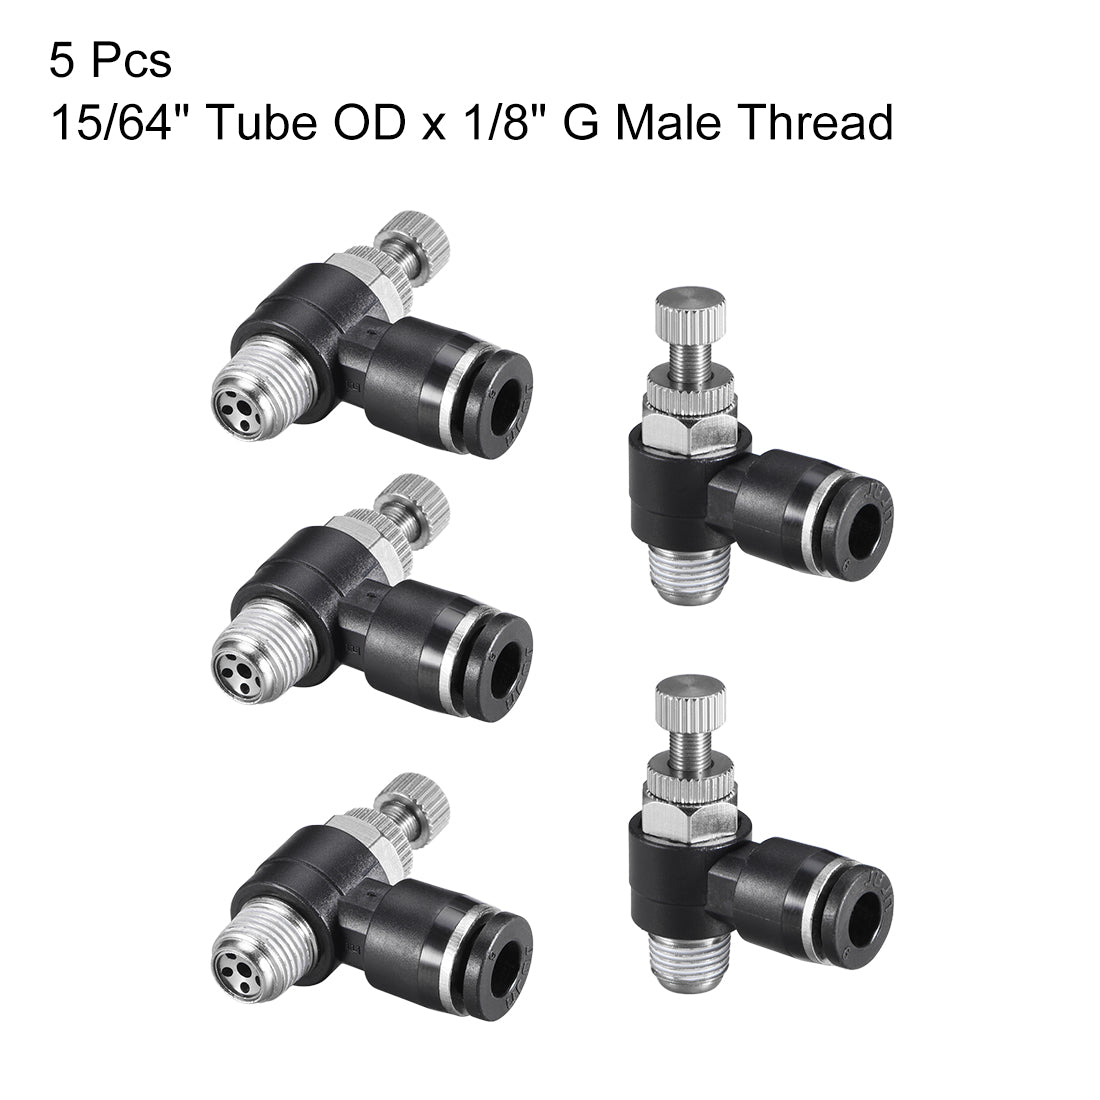 uxcell Uxcell Push-to-Connect Air Flow Control Valve, Elbow, 15/64" Tube OD x 1/8" G  Male Thread Speed controller Valve Tube fitting Black,5pcs